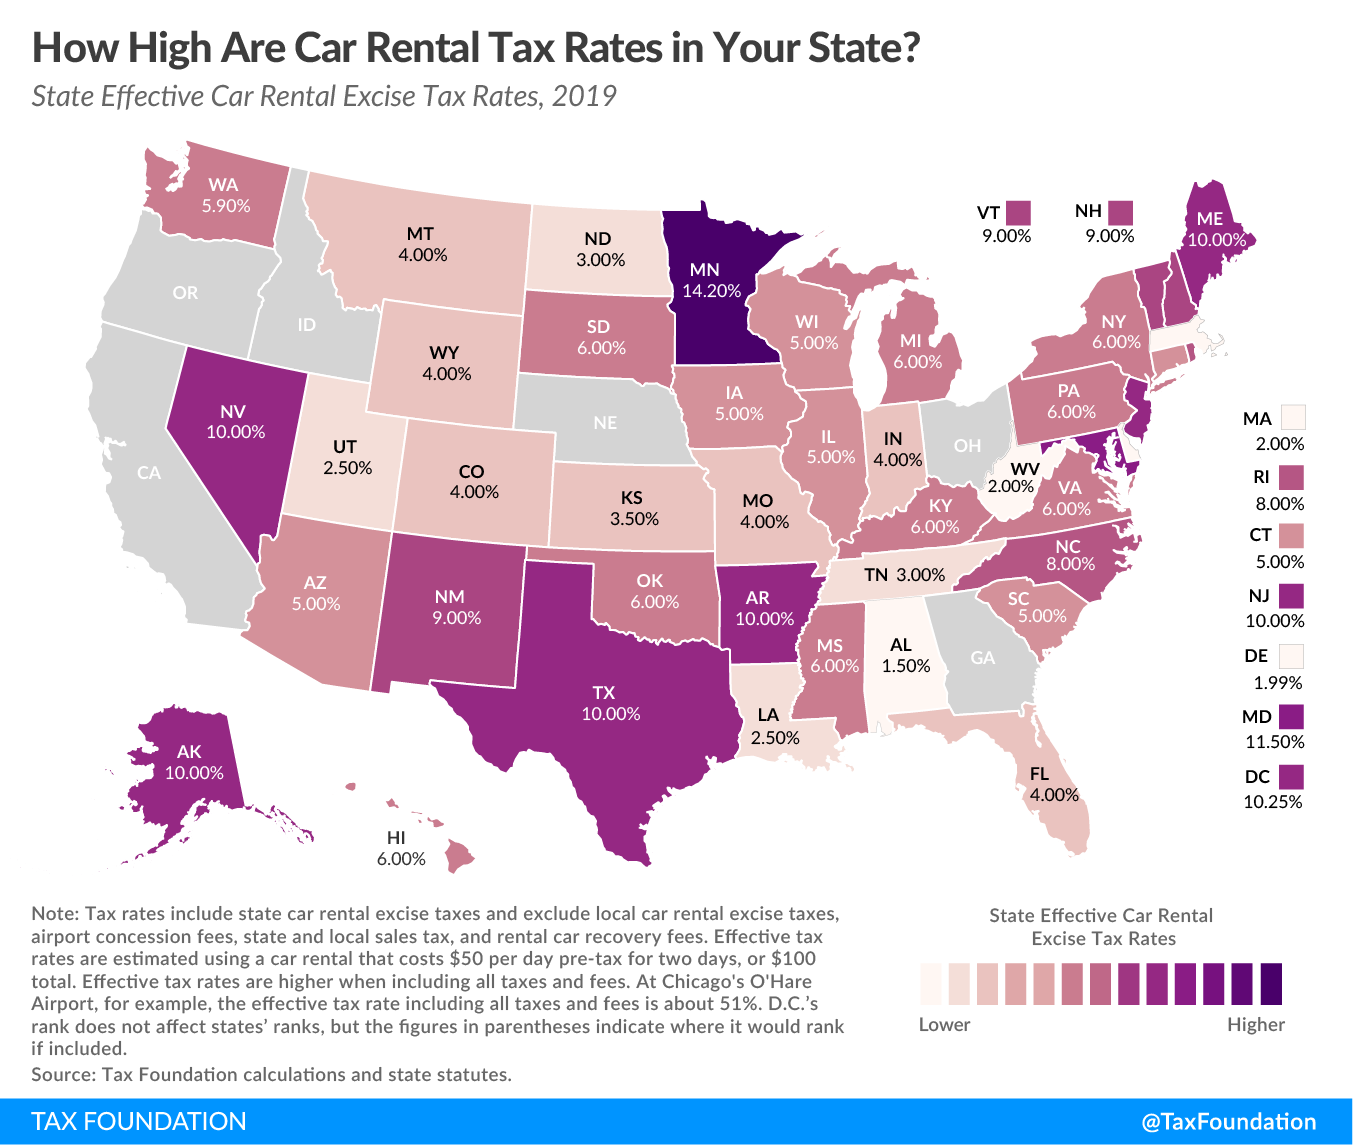 highest car rental tax rates in your state? rental car taxes, rental car excise taxes, peer-to-peer car-sharing